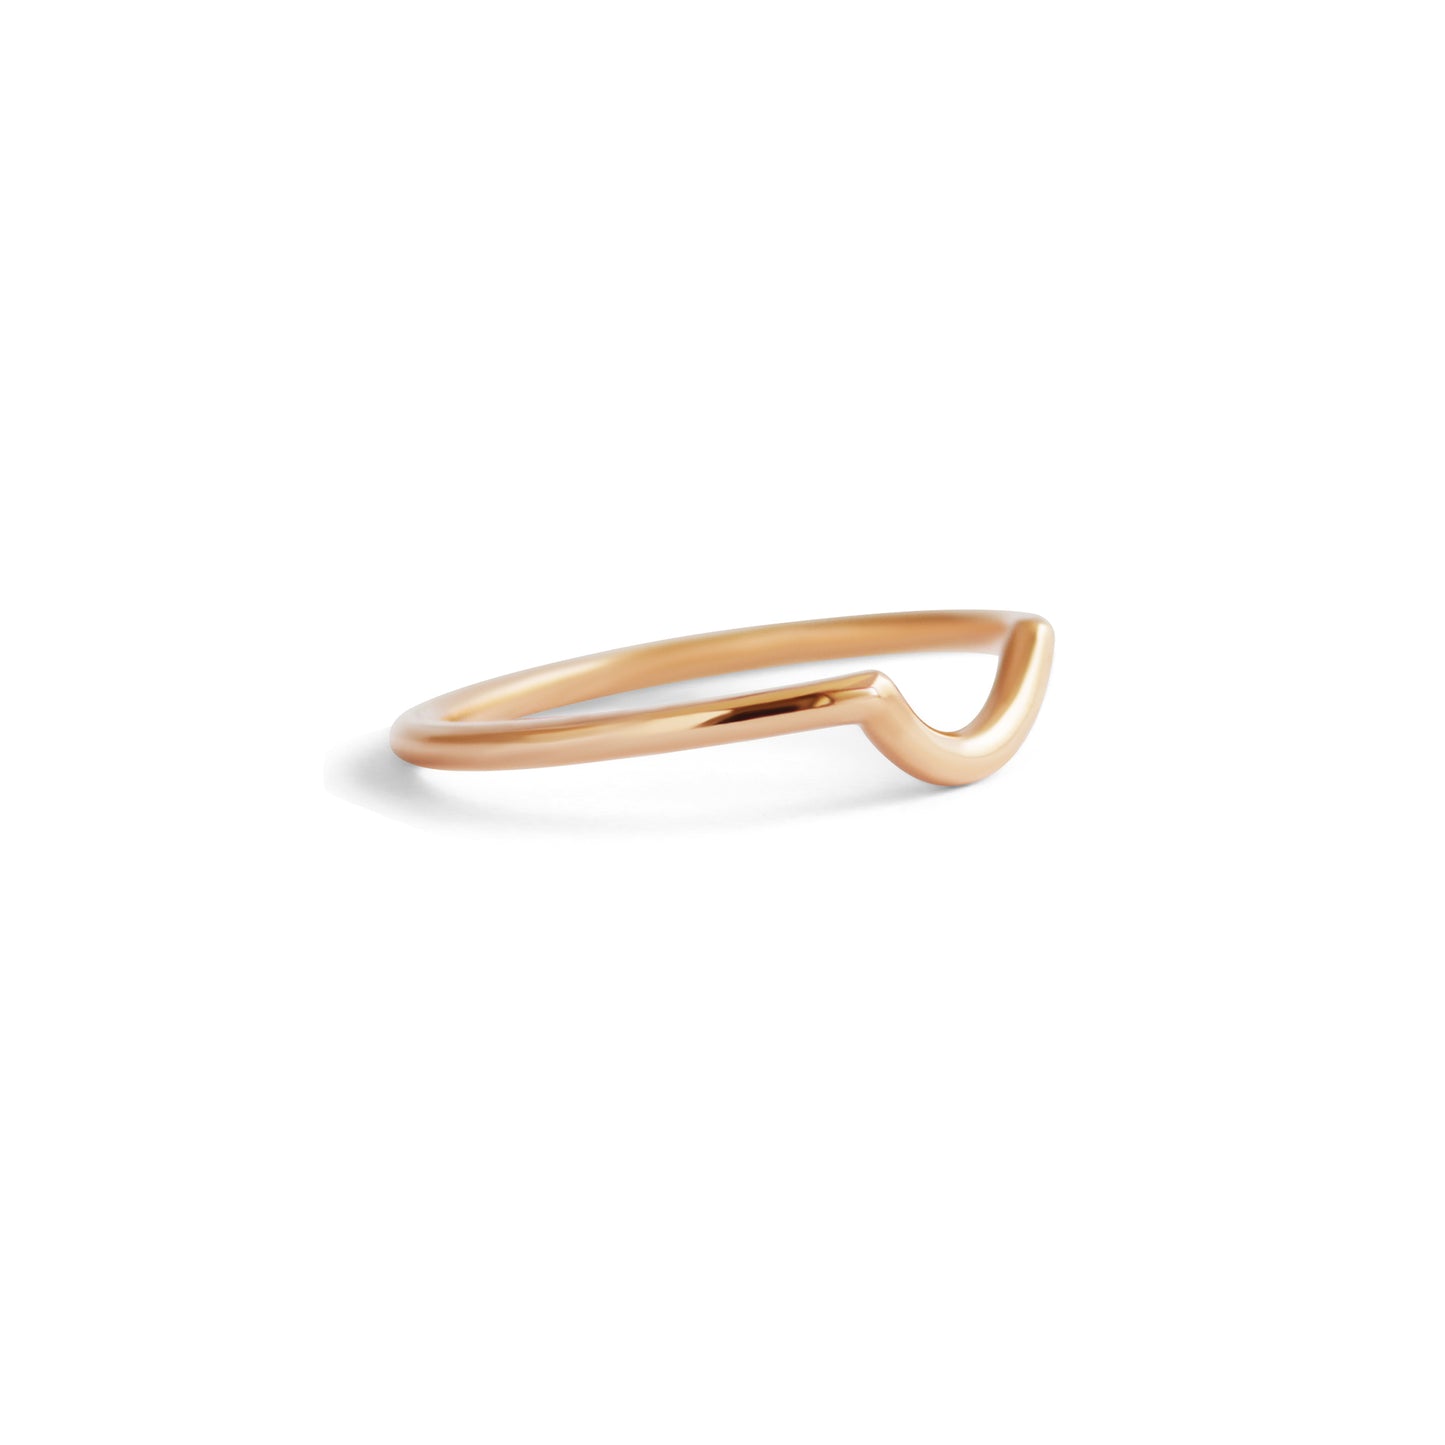 Load image into Gallery viewer, U Ring Thin Round Band - Goldpoint Studio - Greenpoint, Brooklyn - Fine Jewelry
